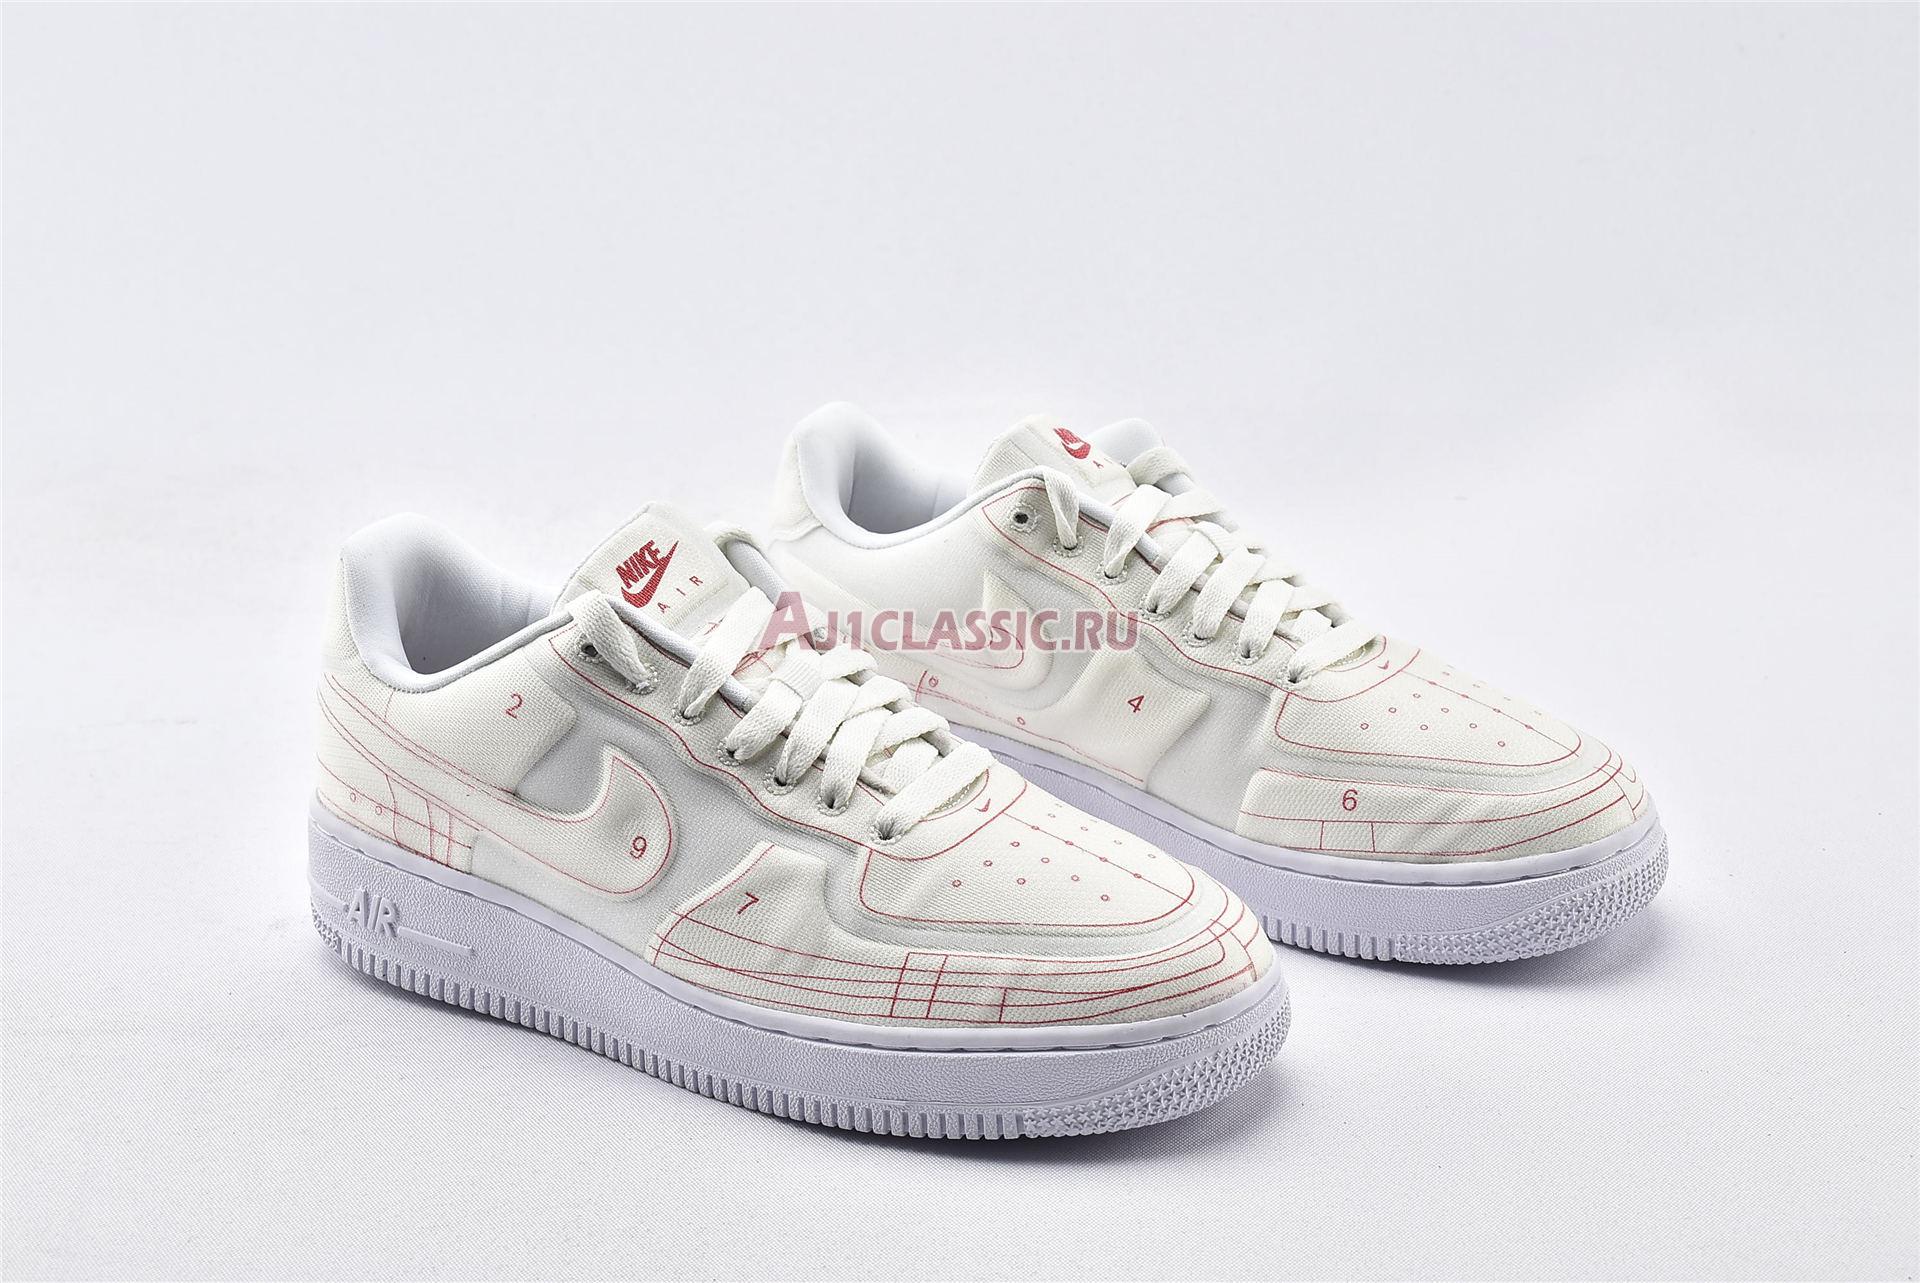 Nike Wmns Air Force 1 07 Low LX "Summit White" CI3445-100